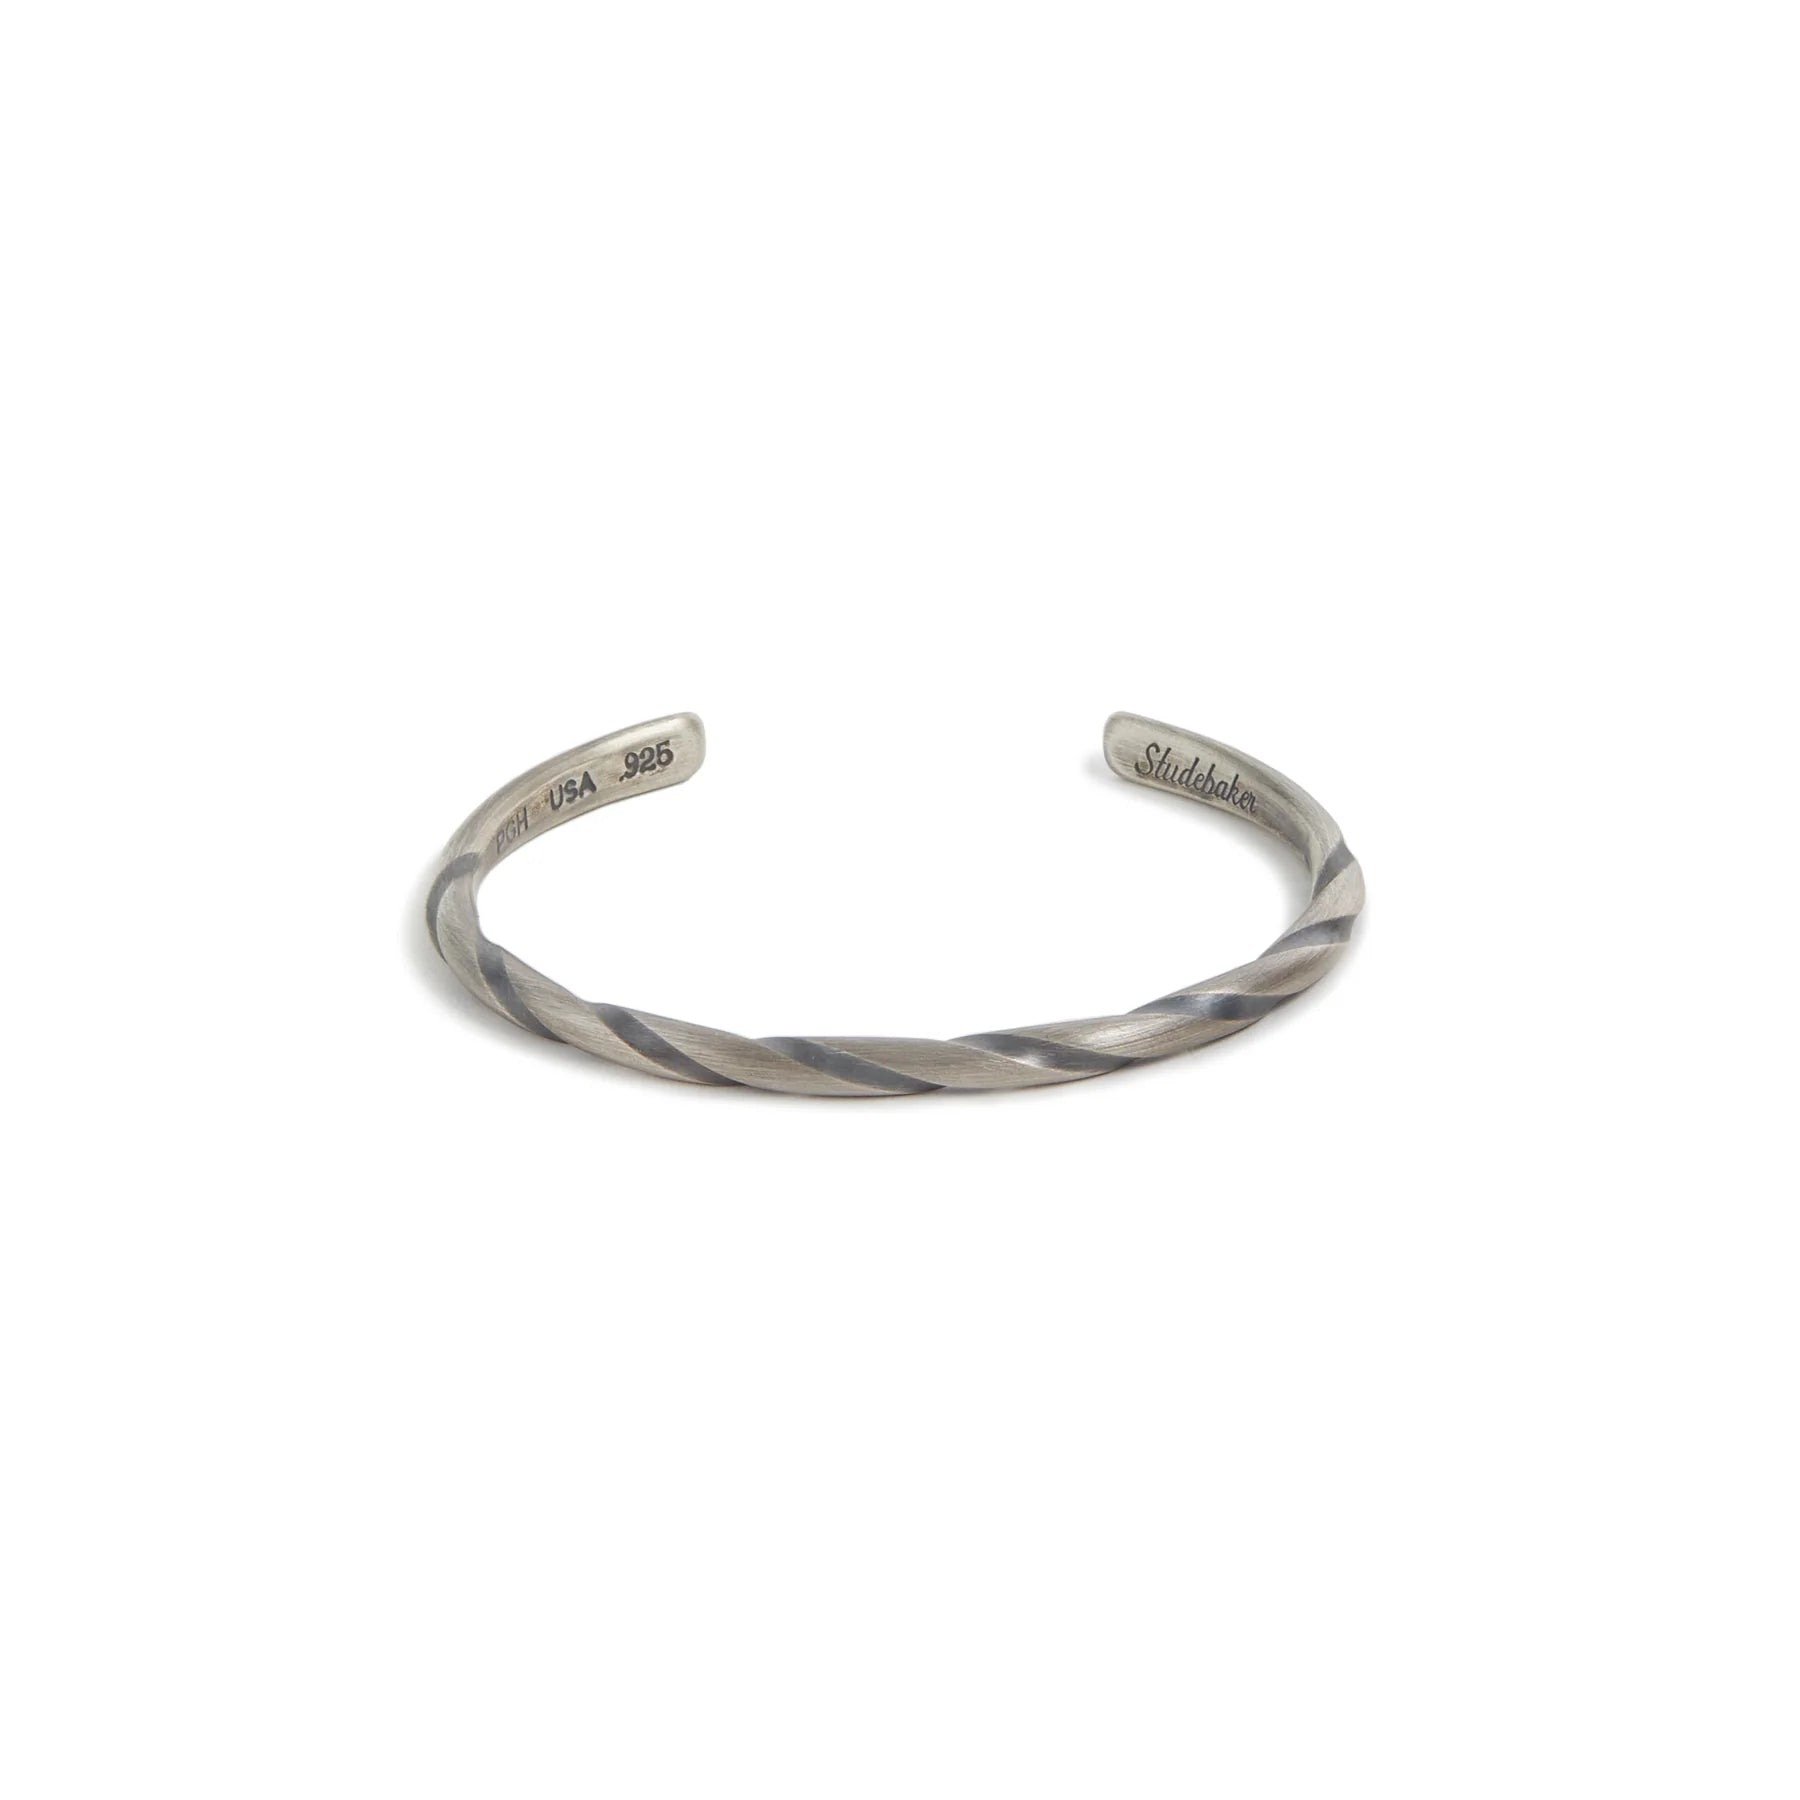 Studebaker - Rotary Cuff - Large-Men's Accessories-Silver-Yaletown-Vancouver-Surrey-Canada